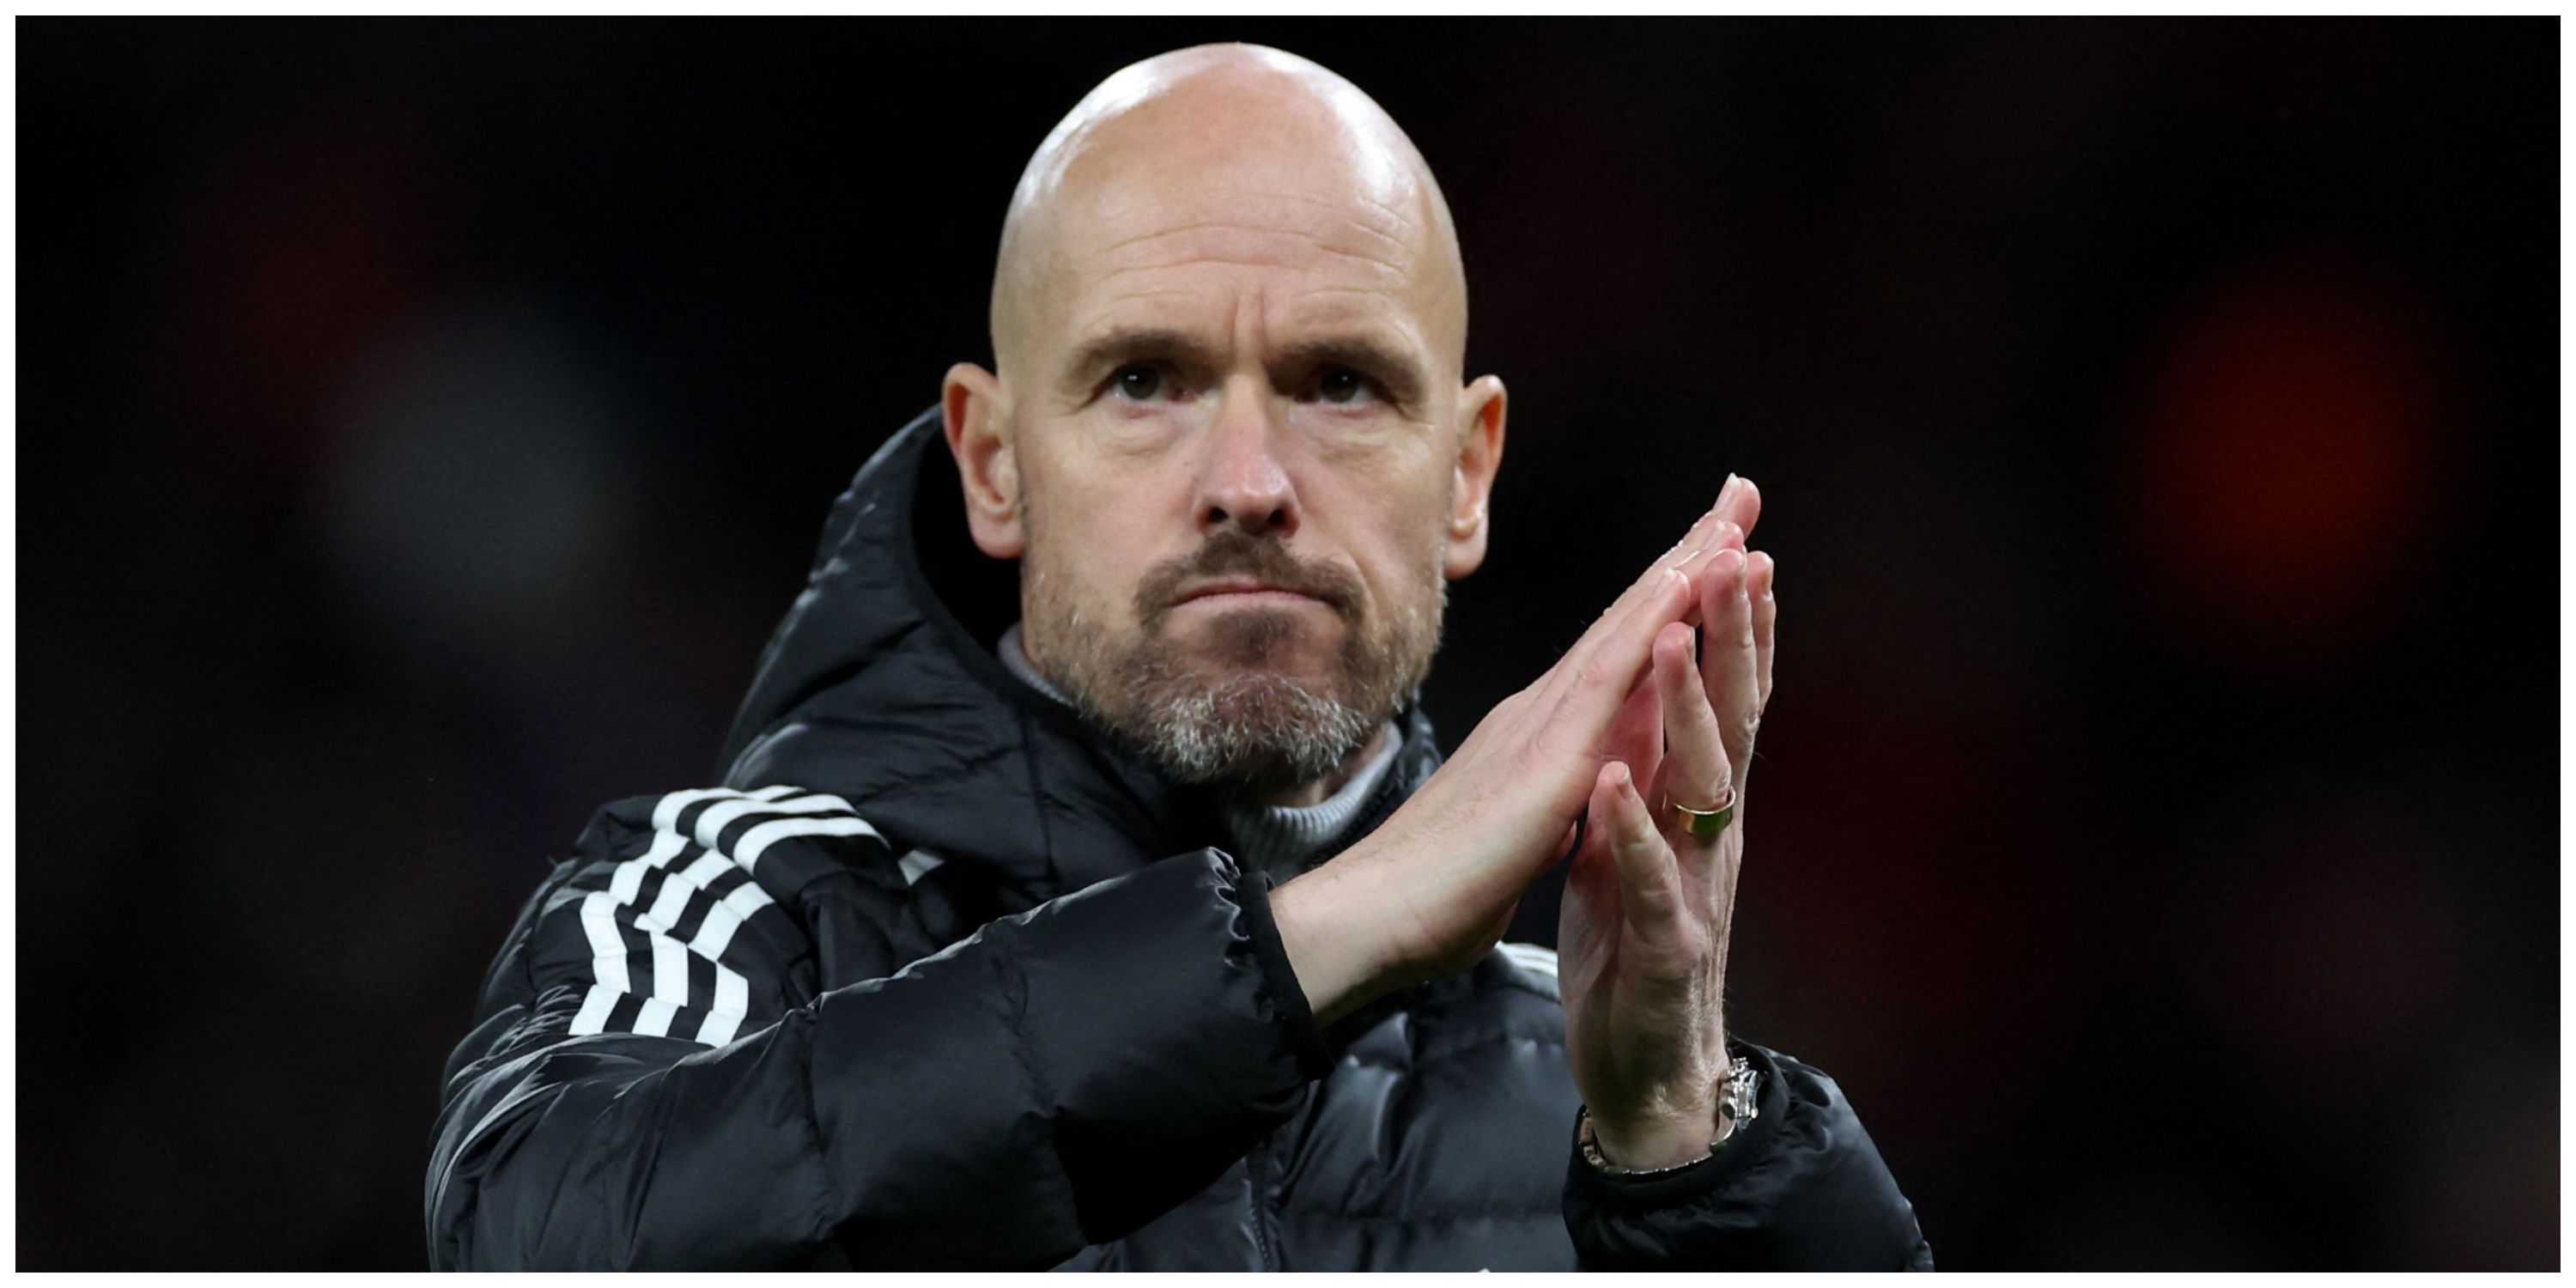 Manchester United manager Erik ten Hag clapping